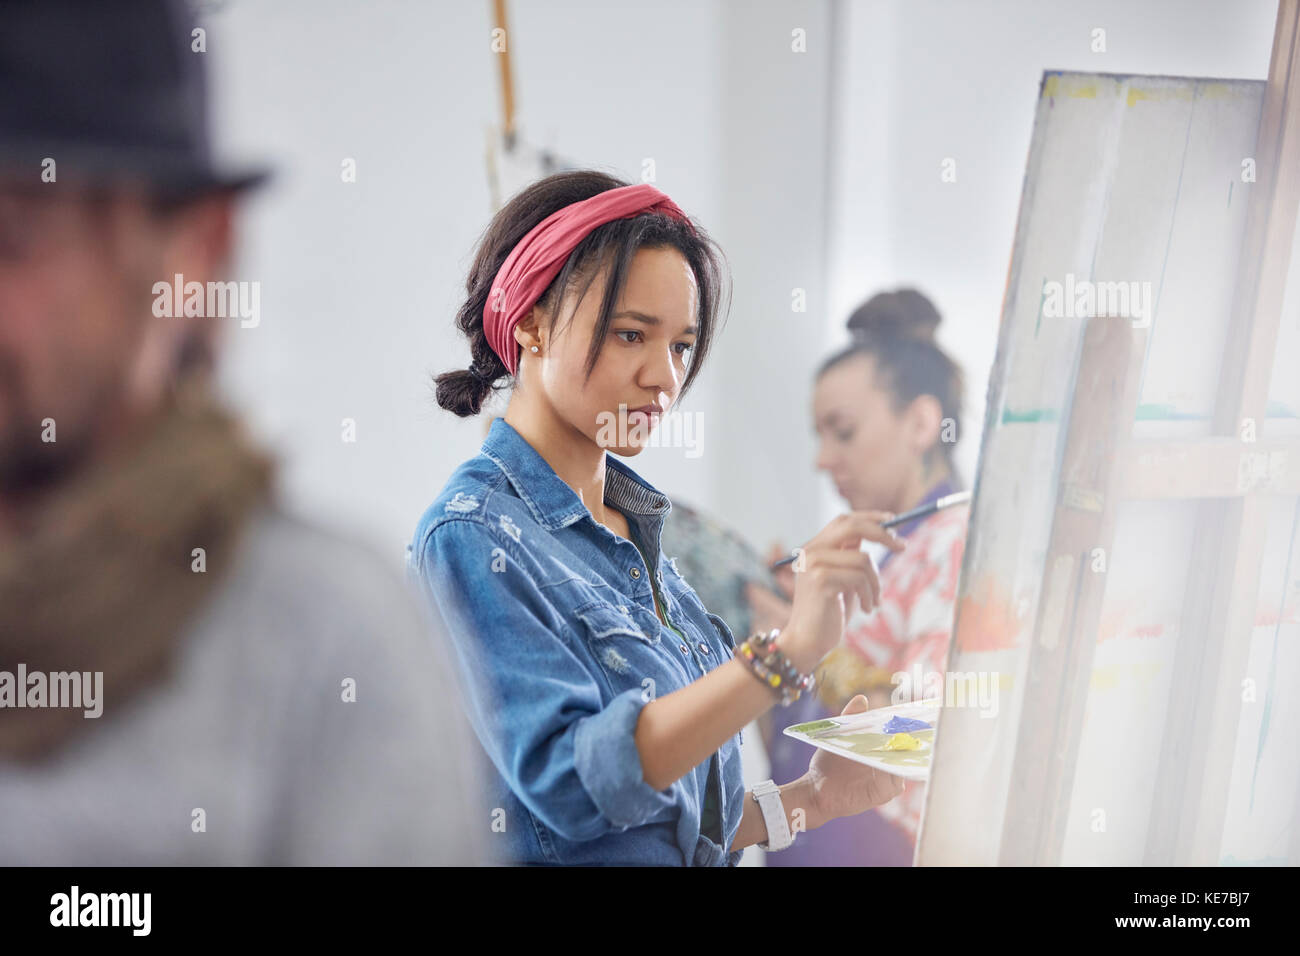 Focused female artist painting at easel in art class studio Stock Photo